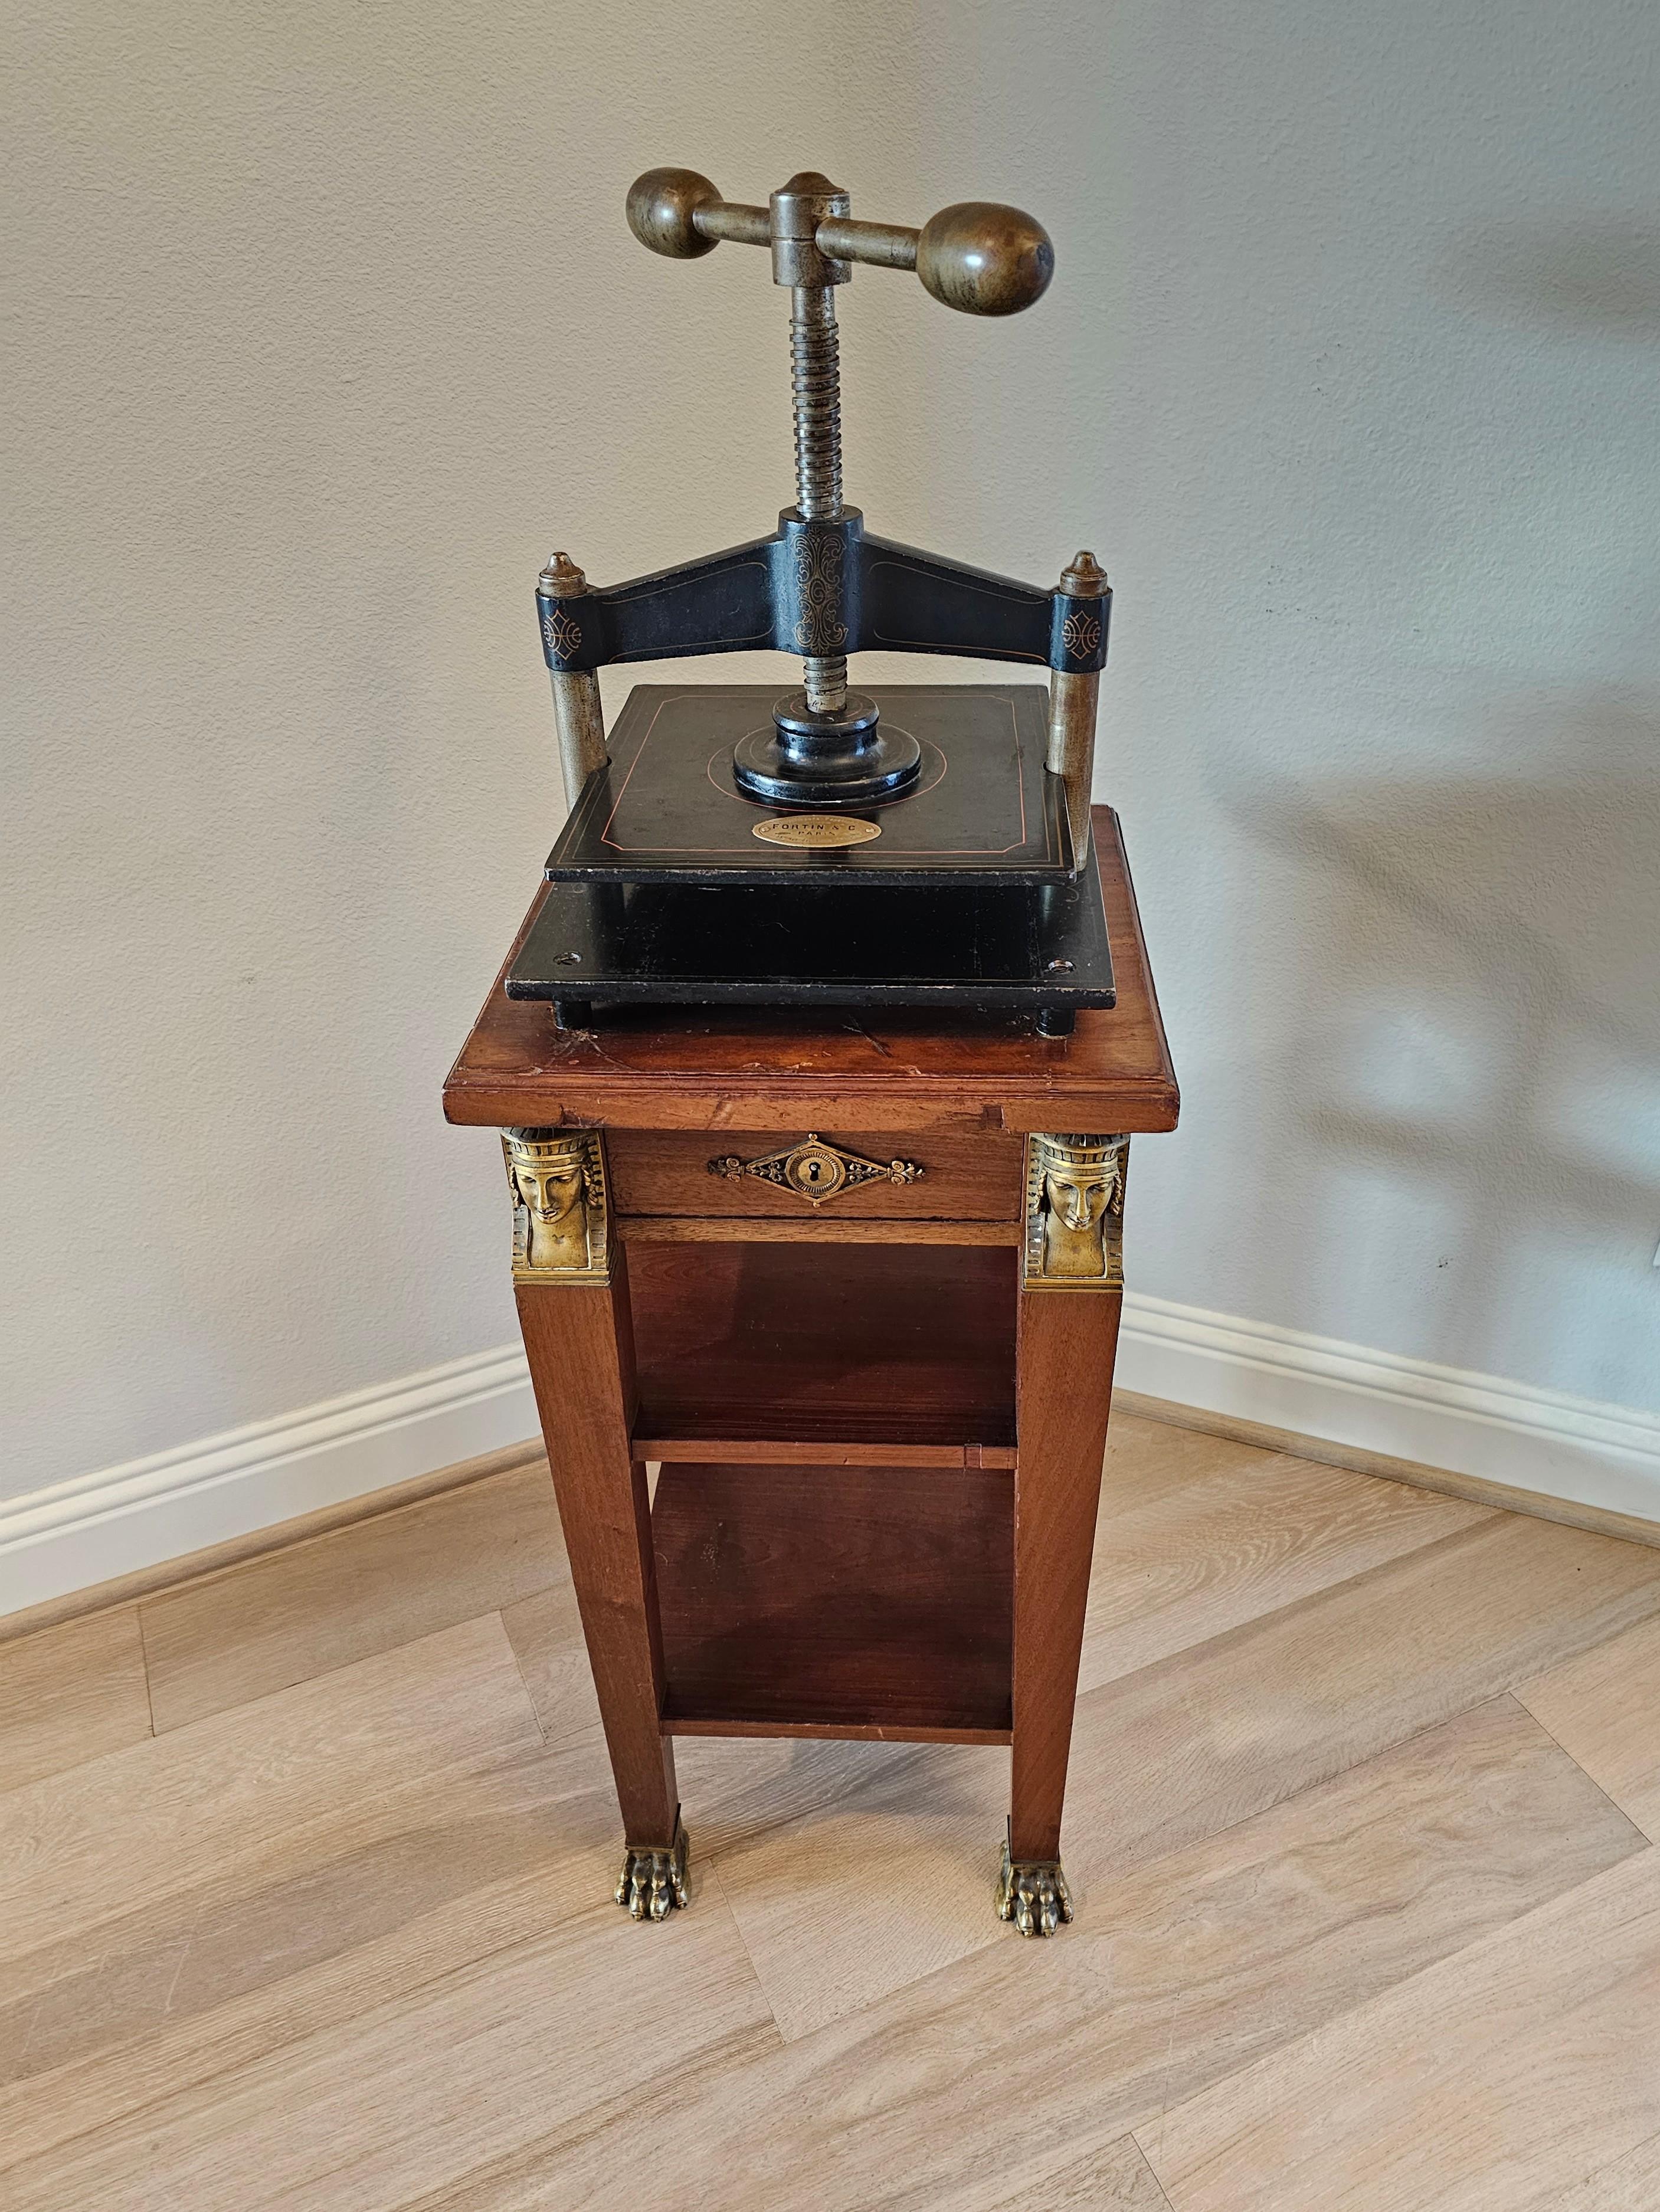 A rare, one-of-a-kind antique, circa 1890, Parisian cast iron bookpress stand by important French publisher Fortin et Cie, 57 Rue des Petits-Champs, Paris, France.

Late 19th century, having a heavy industrial cast iron hand-crank screw press book